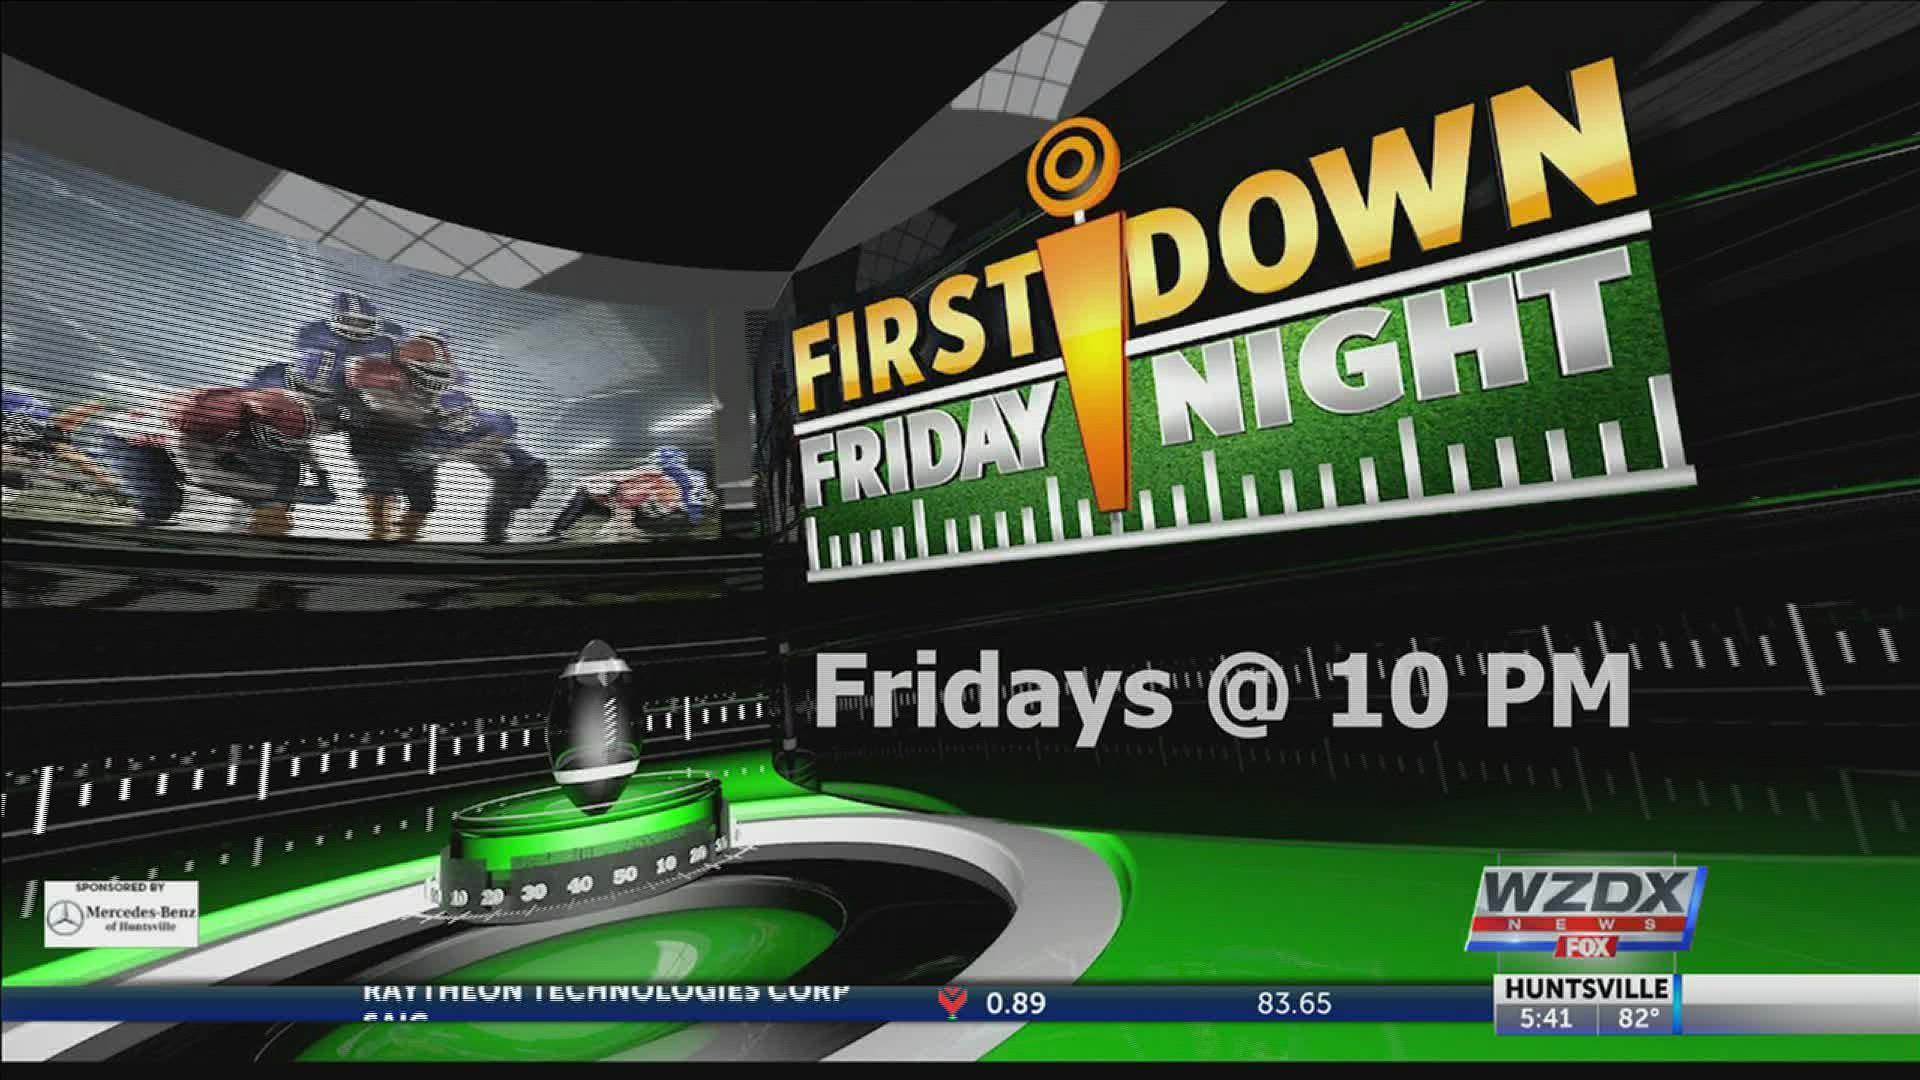 It's Friday Night, and that means we're bringing you high school football action!